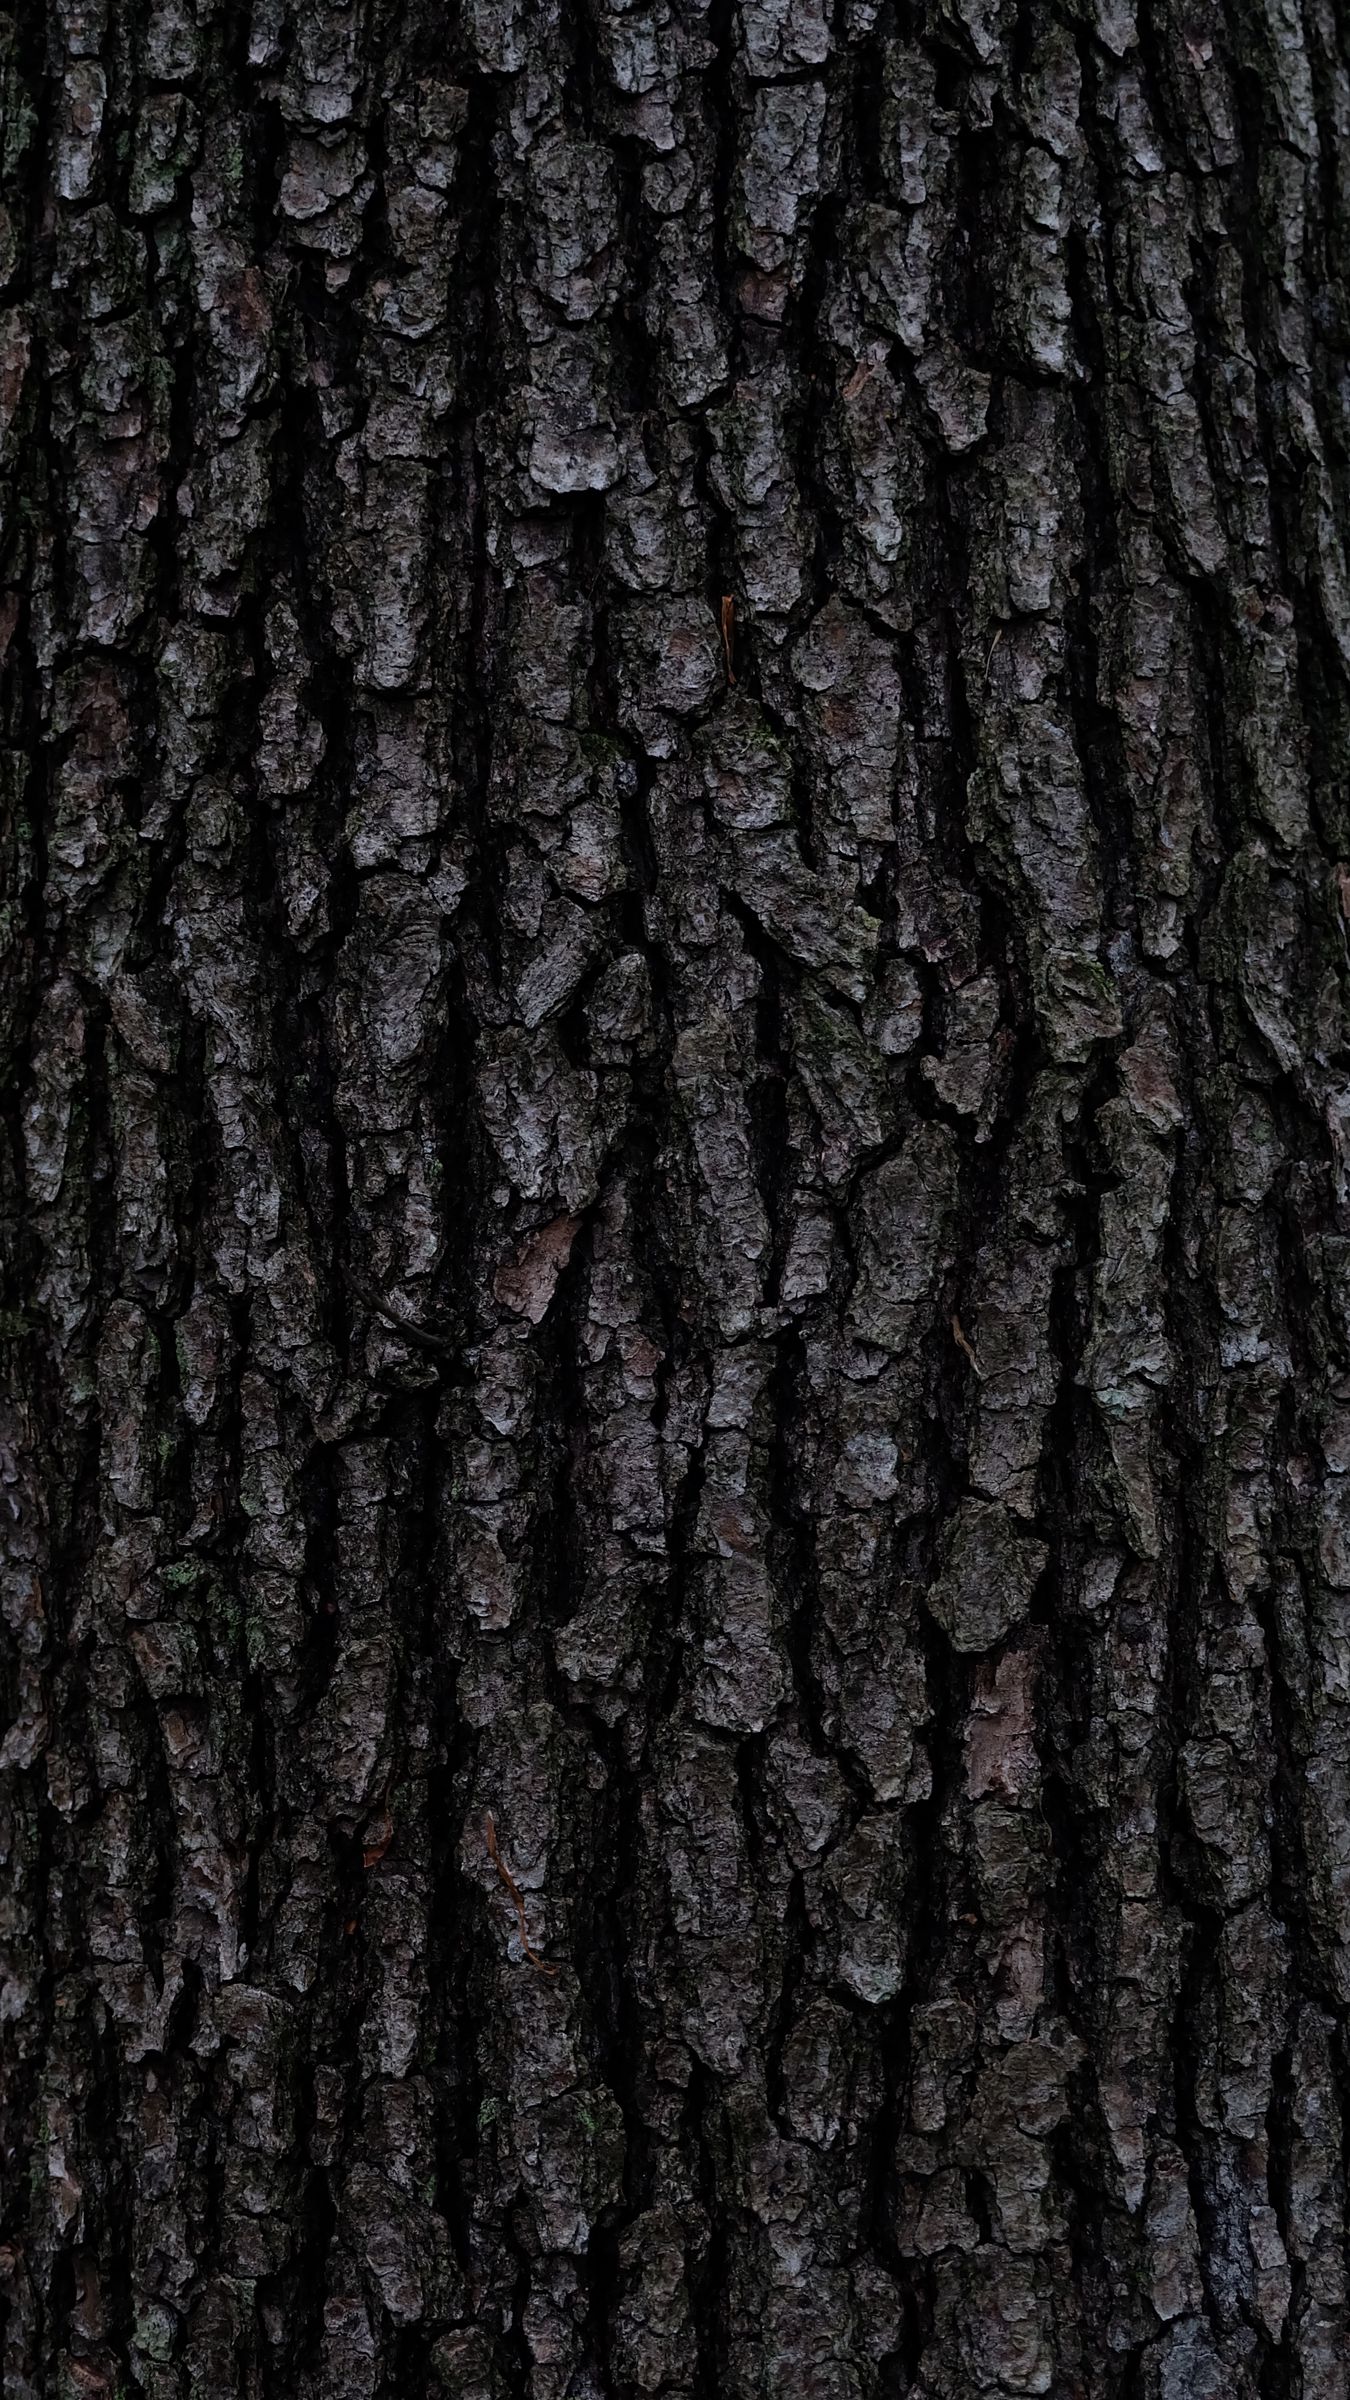 Tree Bark Photos Download The BEST Free Tree Bark Stock Photos  HD Images